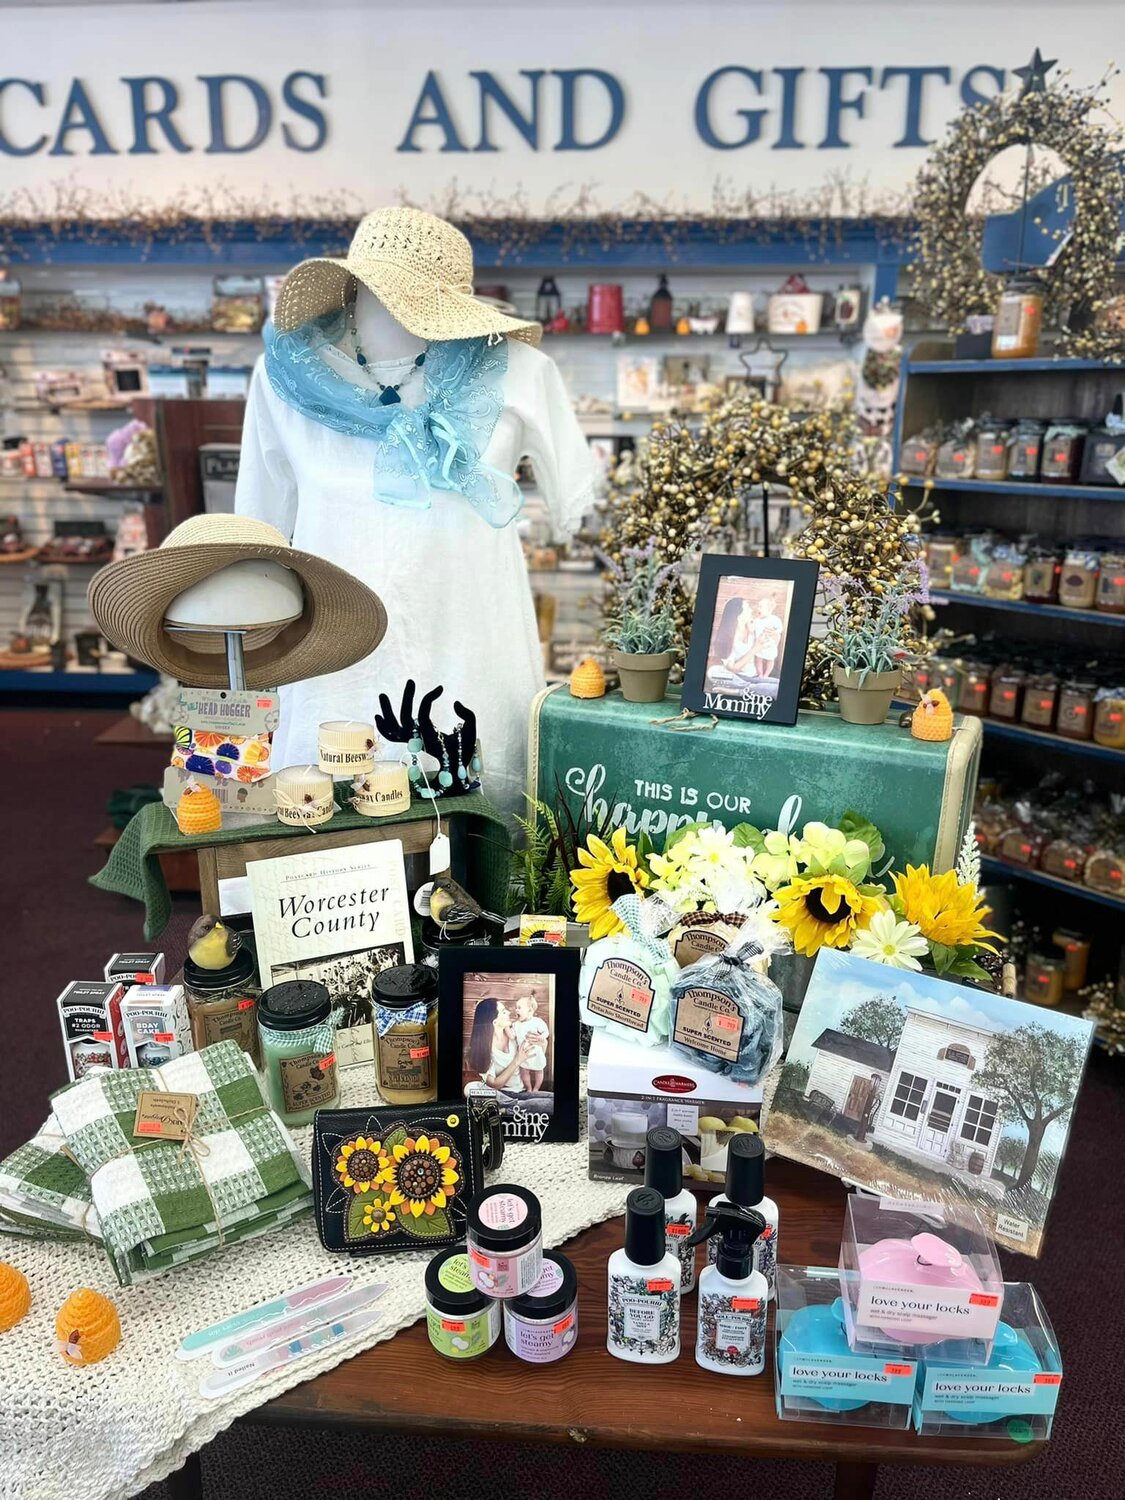 Darlene's Gifts includes Pennsylvania Dutch and Russell Stover candies, stuffed animals, Simply Southern T-shirts, socks, beach gifts, knick-knacks and signs.